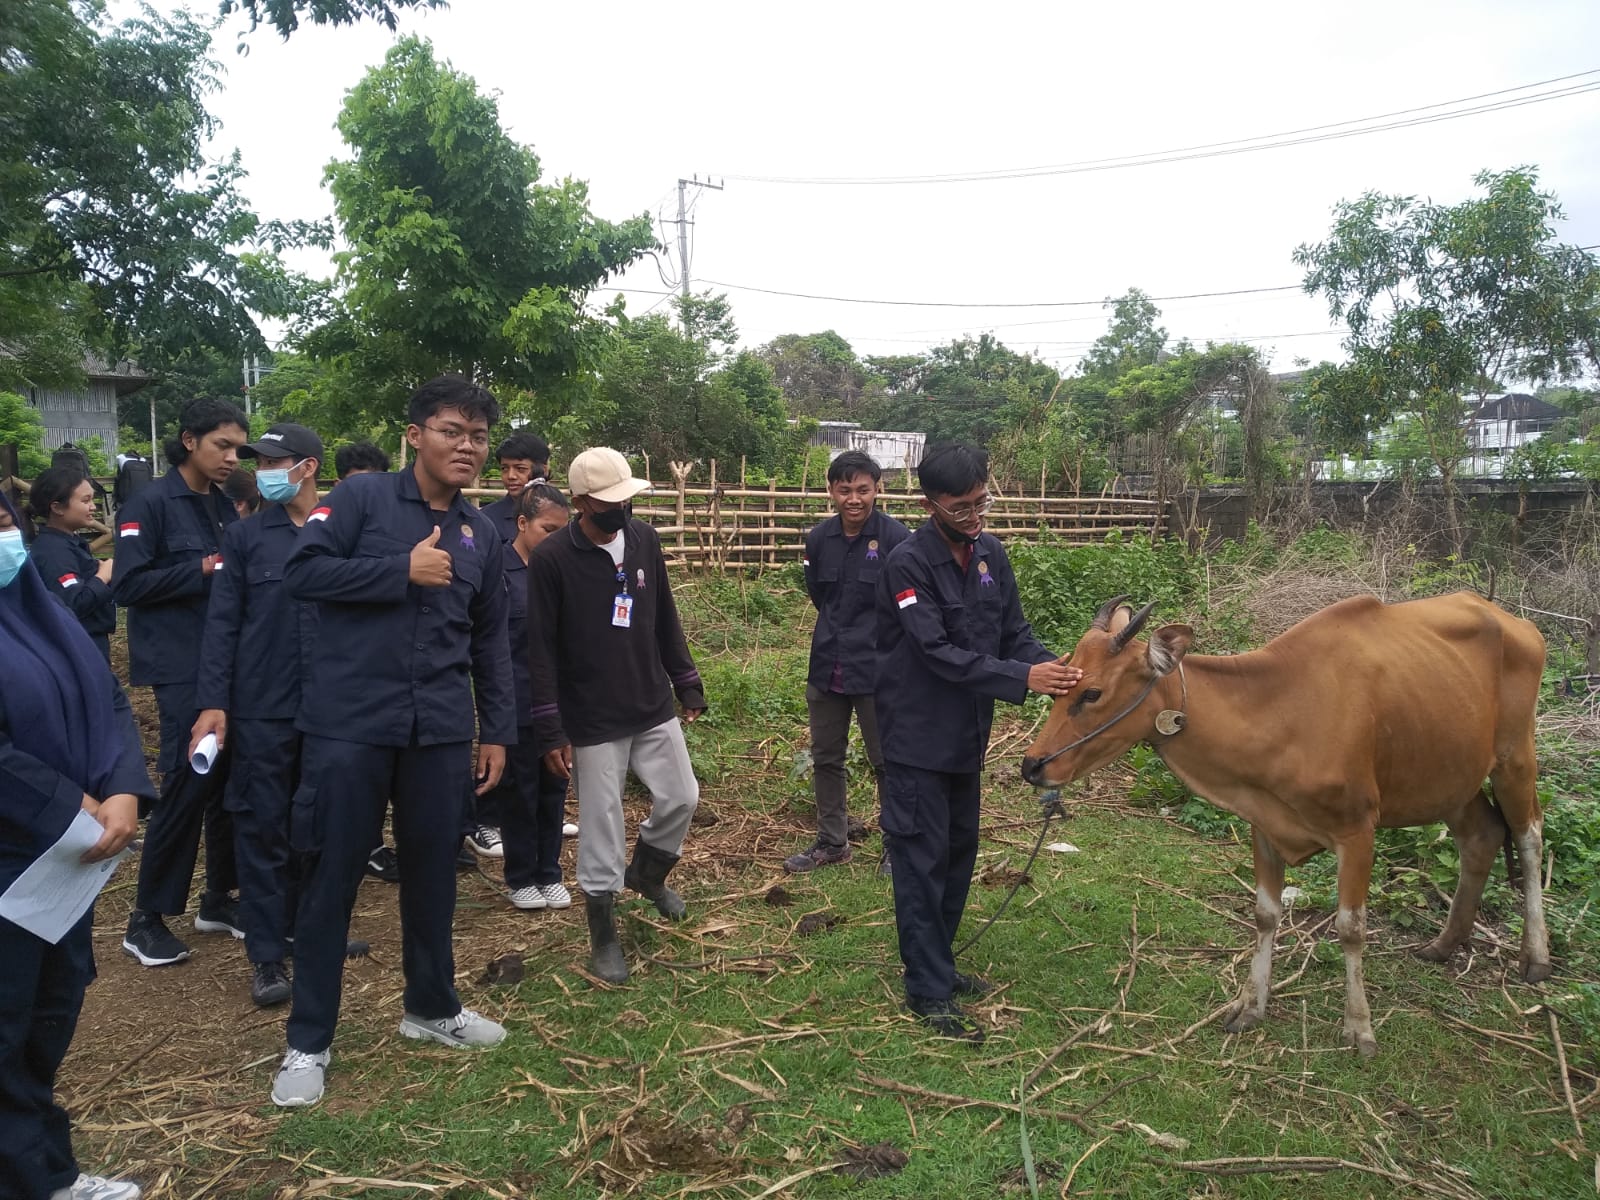 Undergraduate Study Program of Animal Husbandry Faculty of Animal Husbandry of Udayana University Conducts MK Field Practicum. Livestock Inspection Science, Introducing Livestock Approach/Handling Techniques to Students